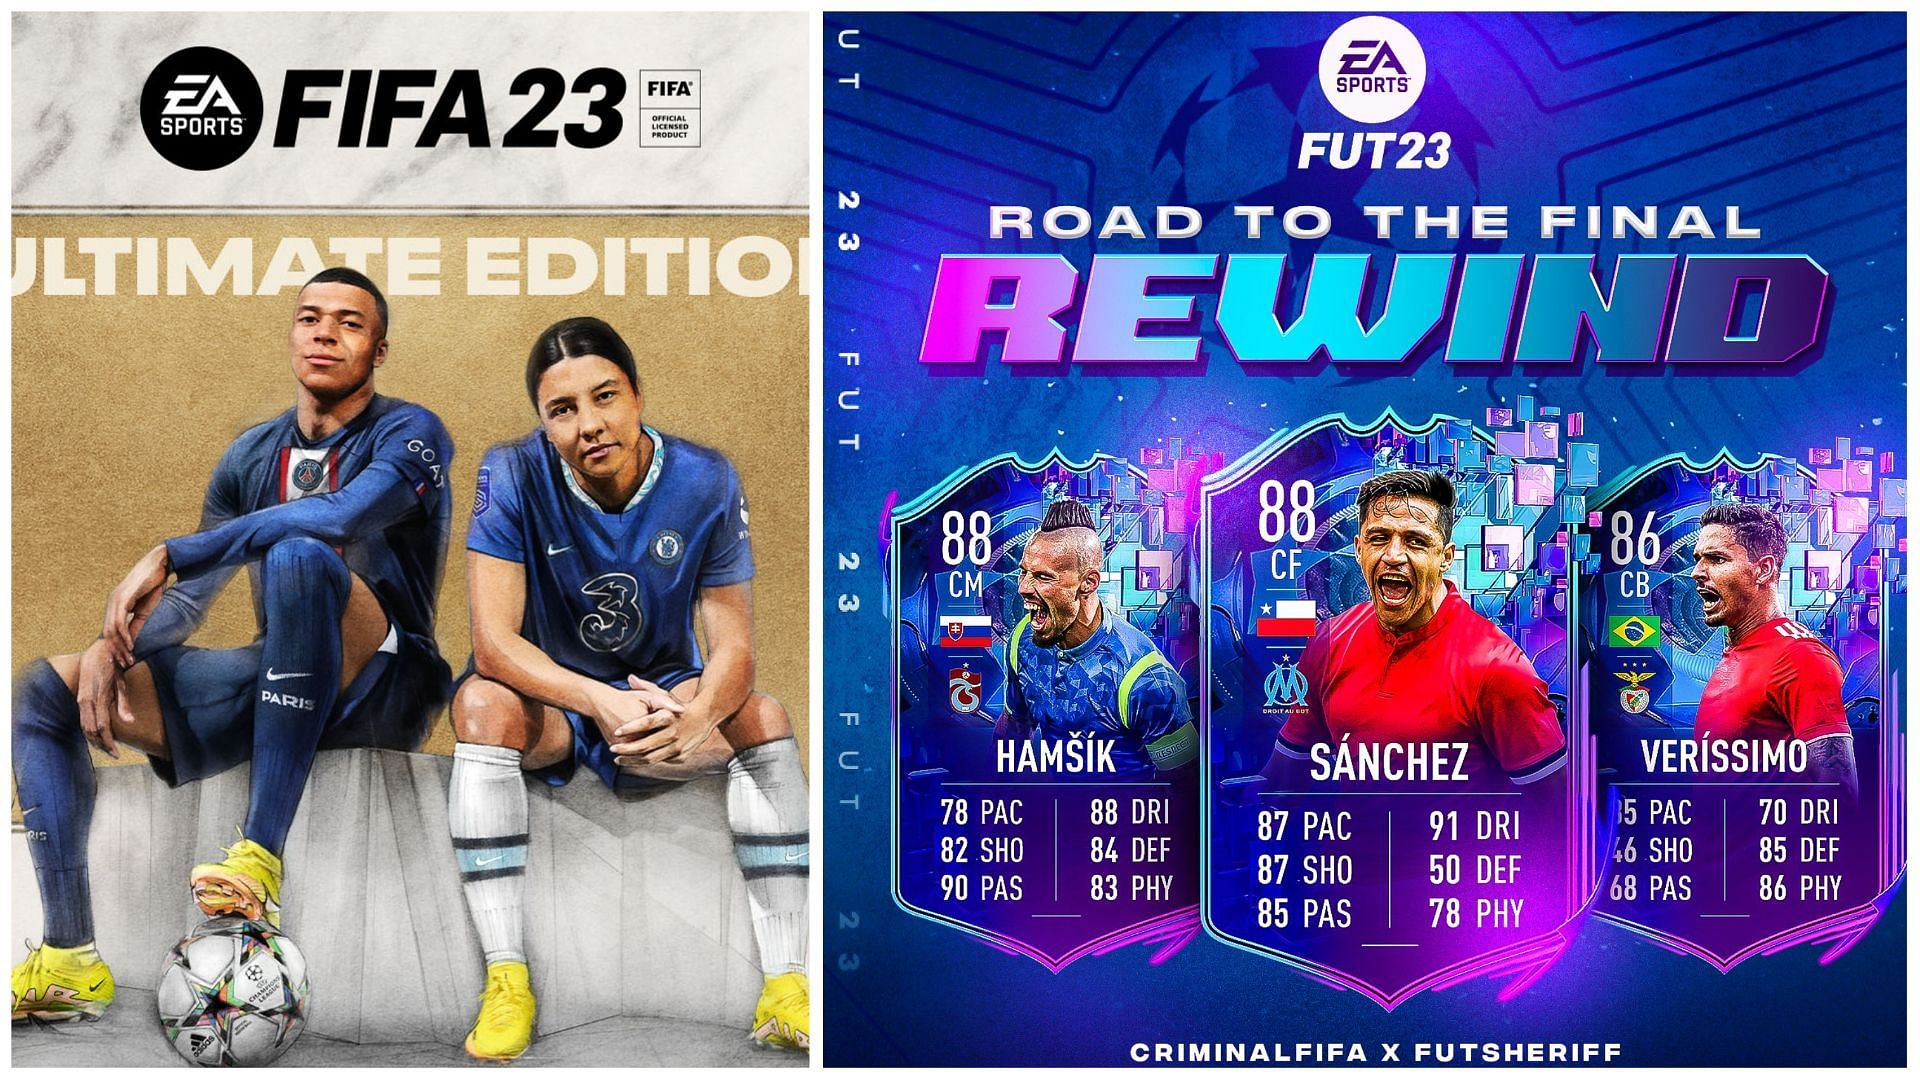 FIFA 23 RTTF: start date and leaks for Road to the Final - Video Games on  Sports Illustrated